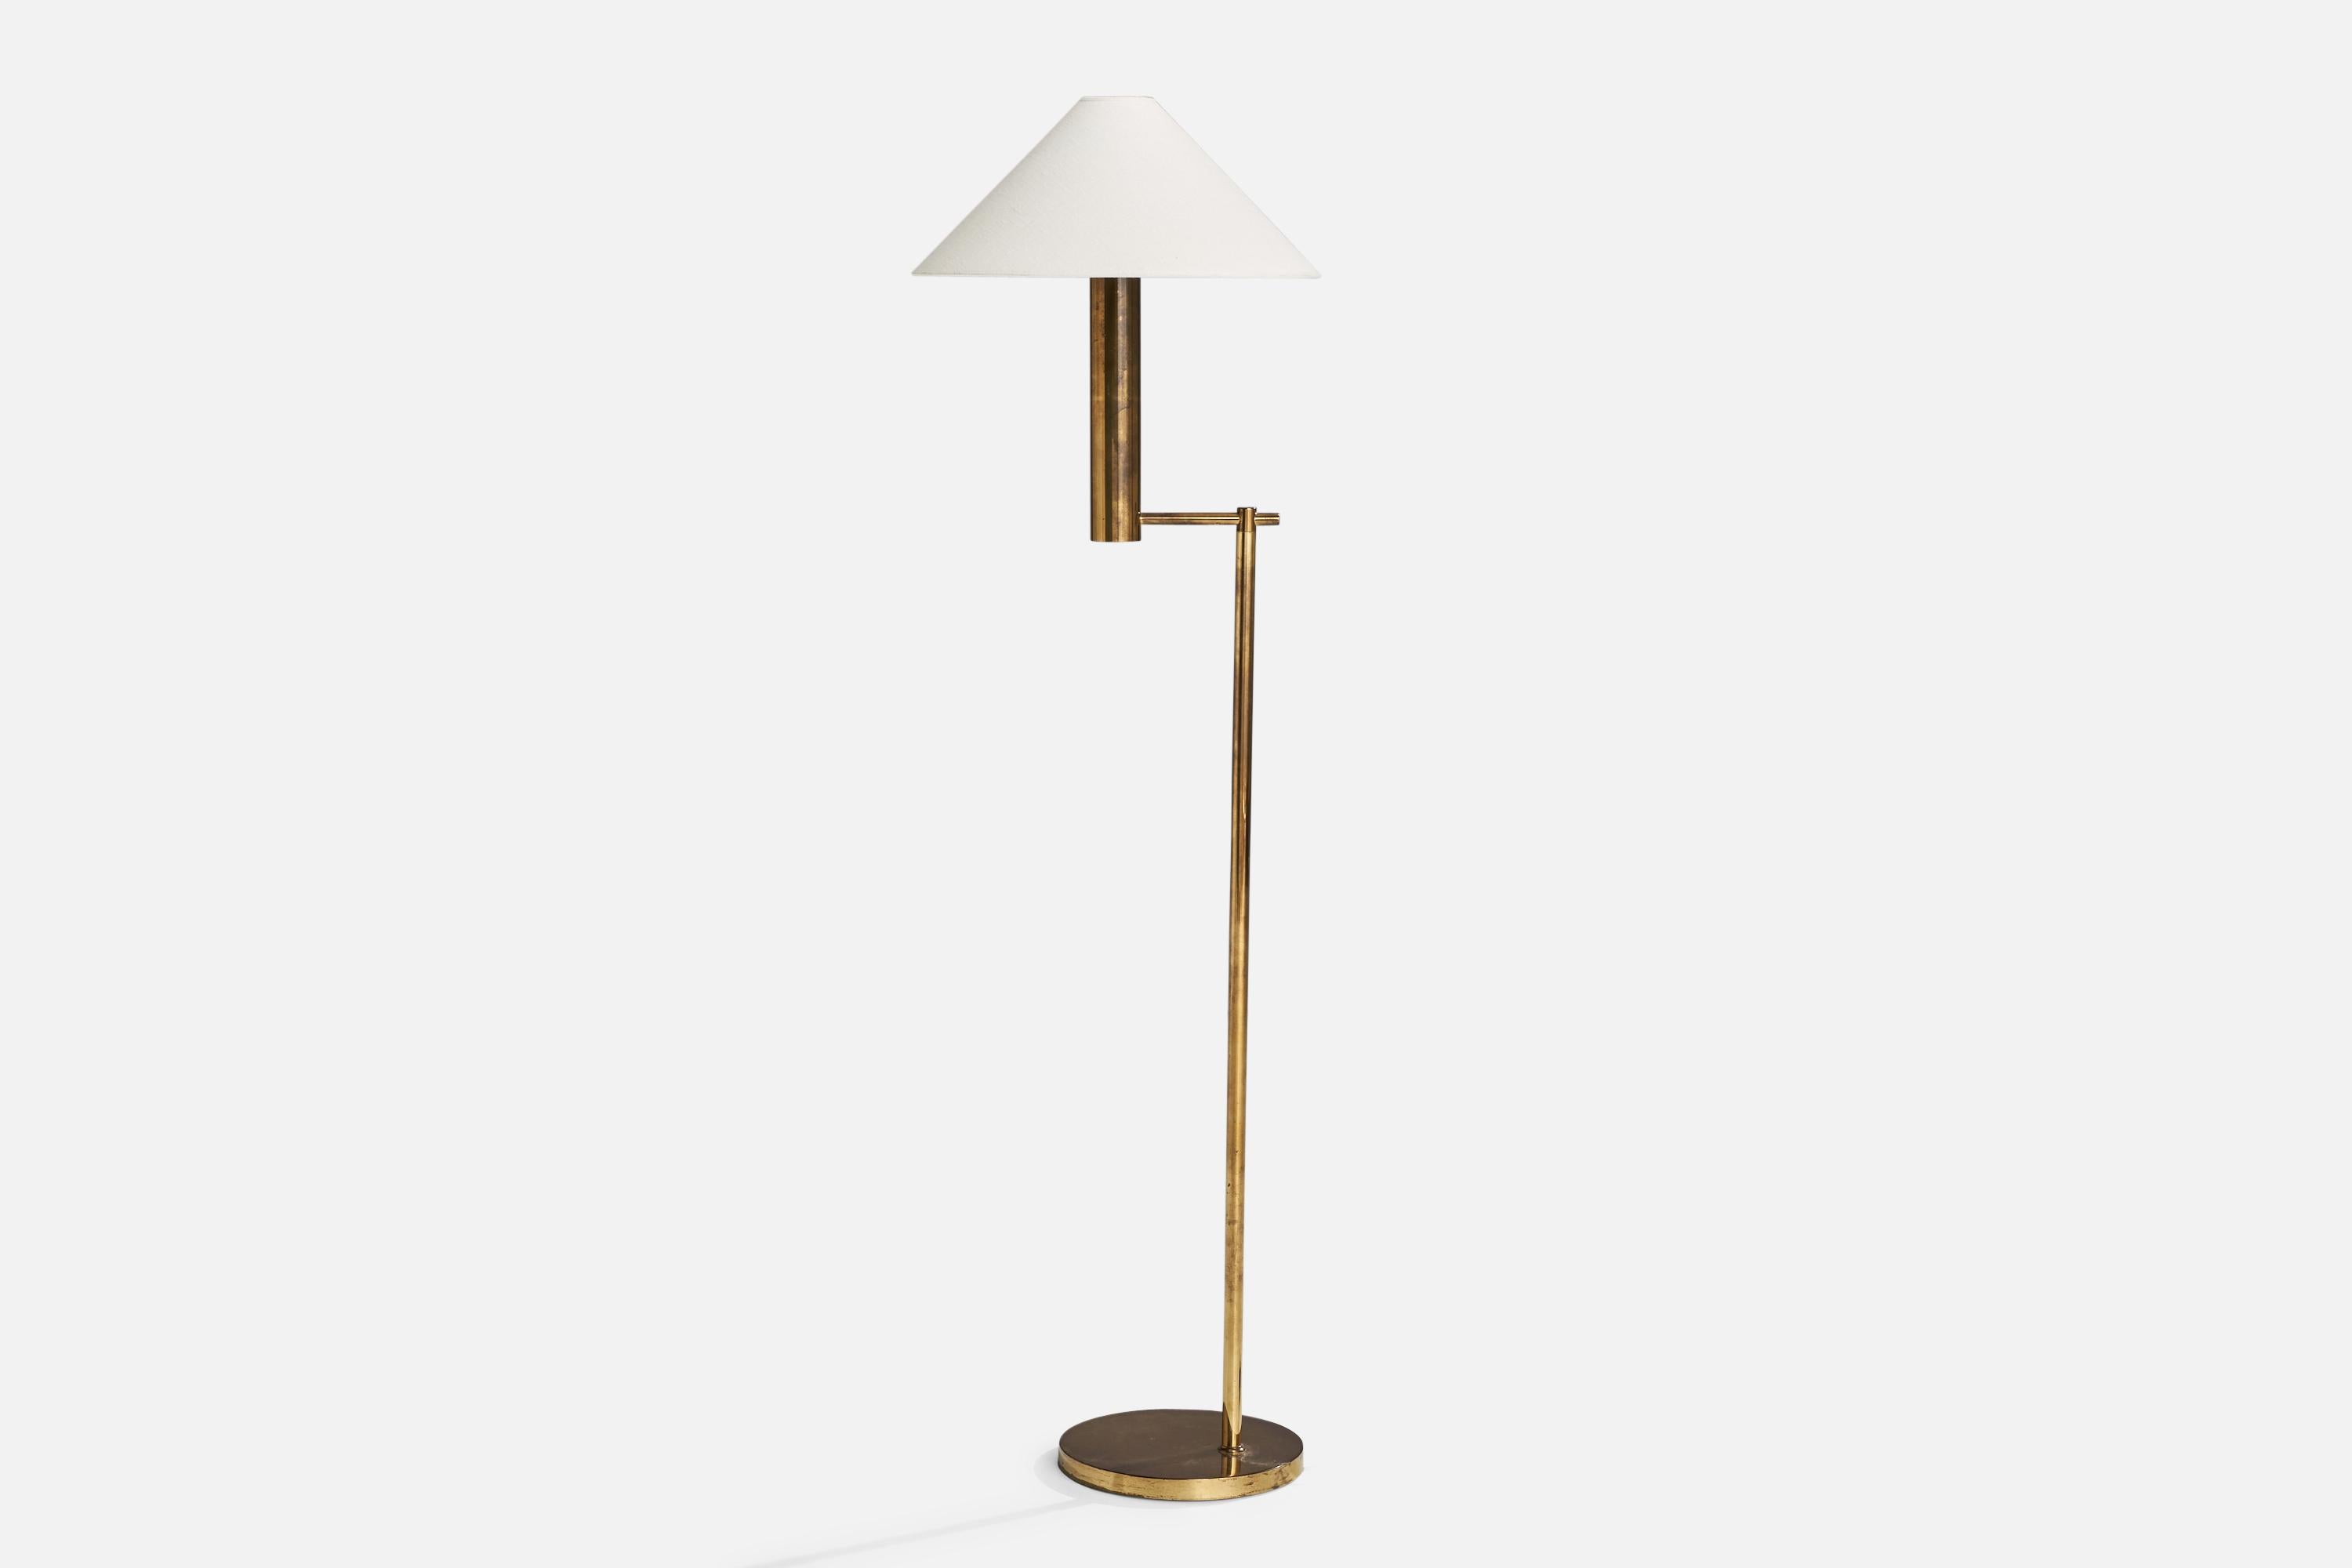 A brass and white fabric floor lamp designed and produced by Høvik Verk, Norway, c. 1960s.

Overall Dimensions (inches): 53.15”  H x 14.18”  W x 16.54”  D
Stated dimensions include shade.
Bulb Specifications: E-26 Bulb
Number of Sockets: 1
All